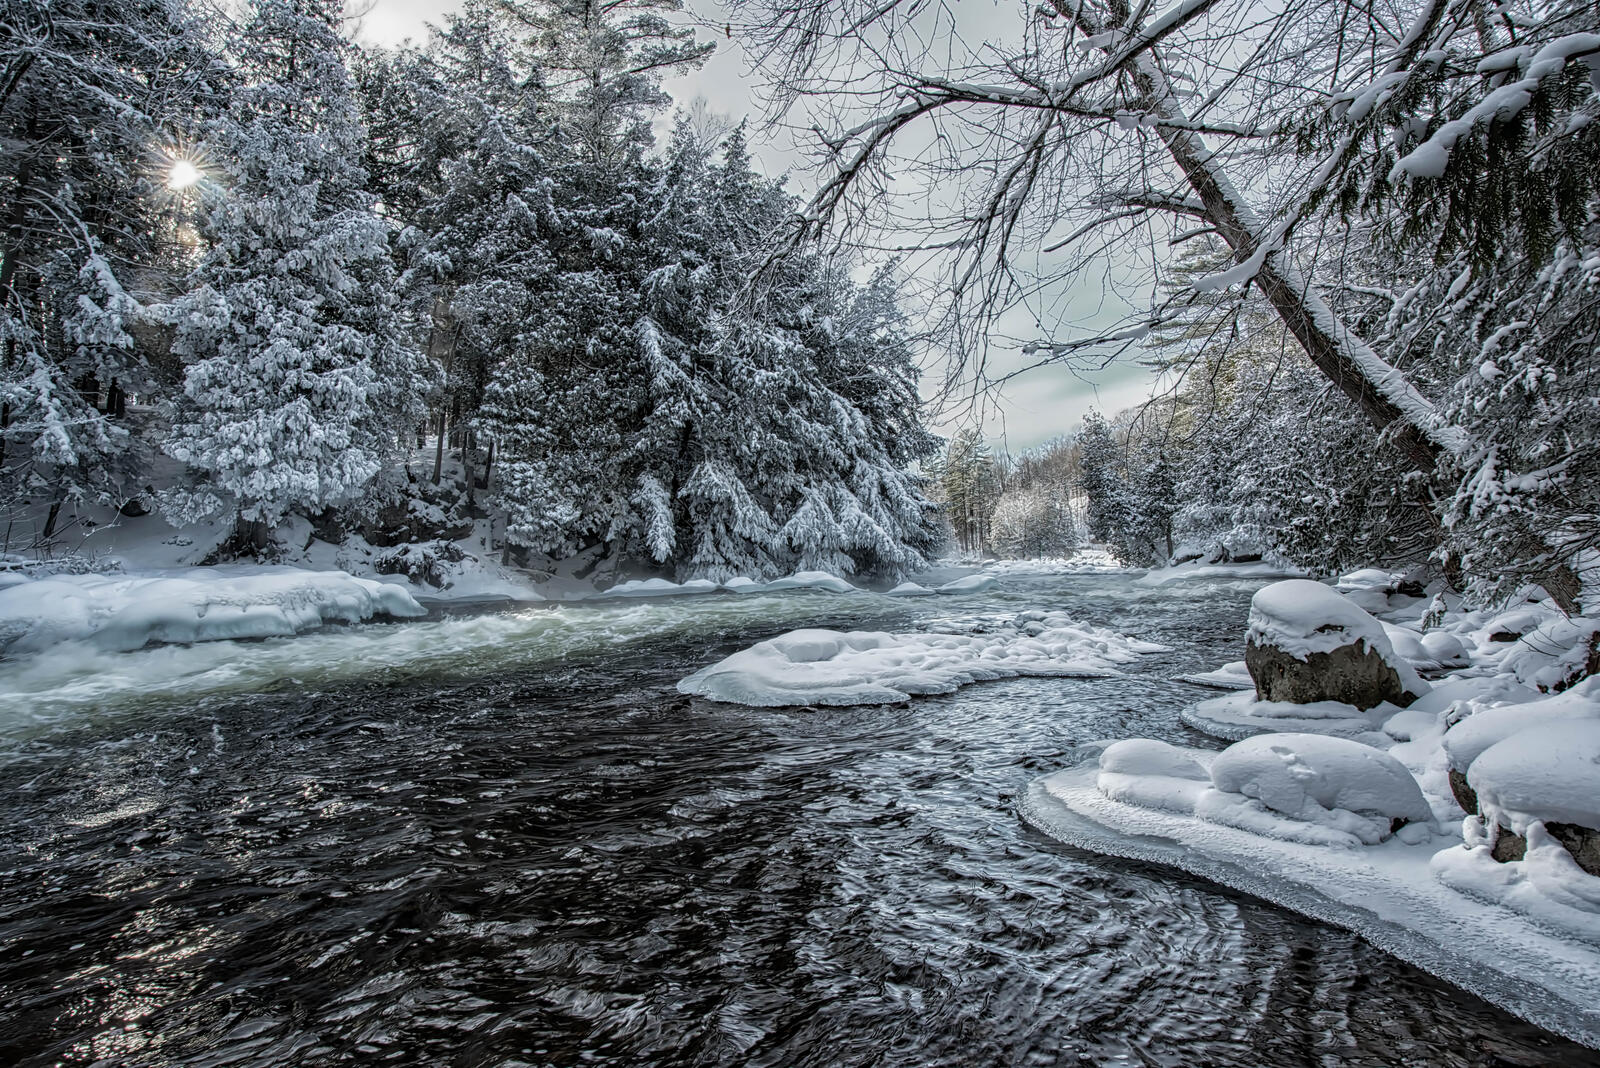 Wallpapers The gull river near Minden Ontario winter on the desktop